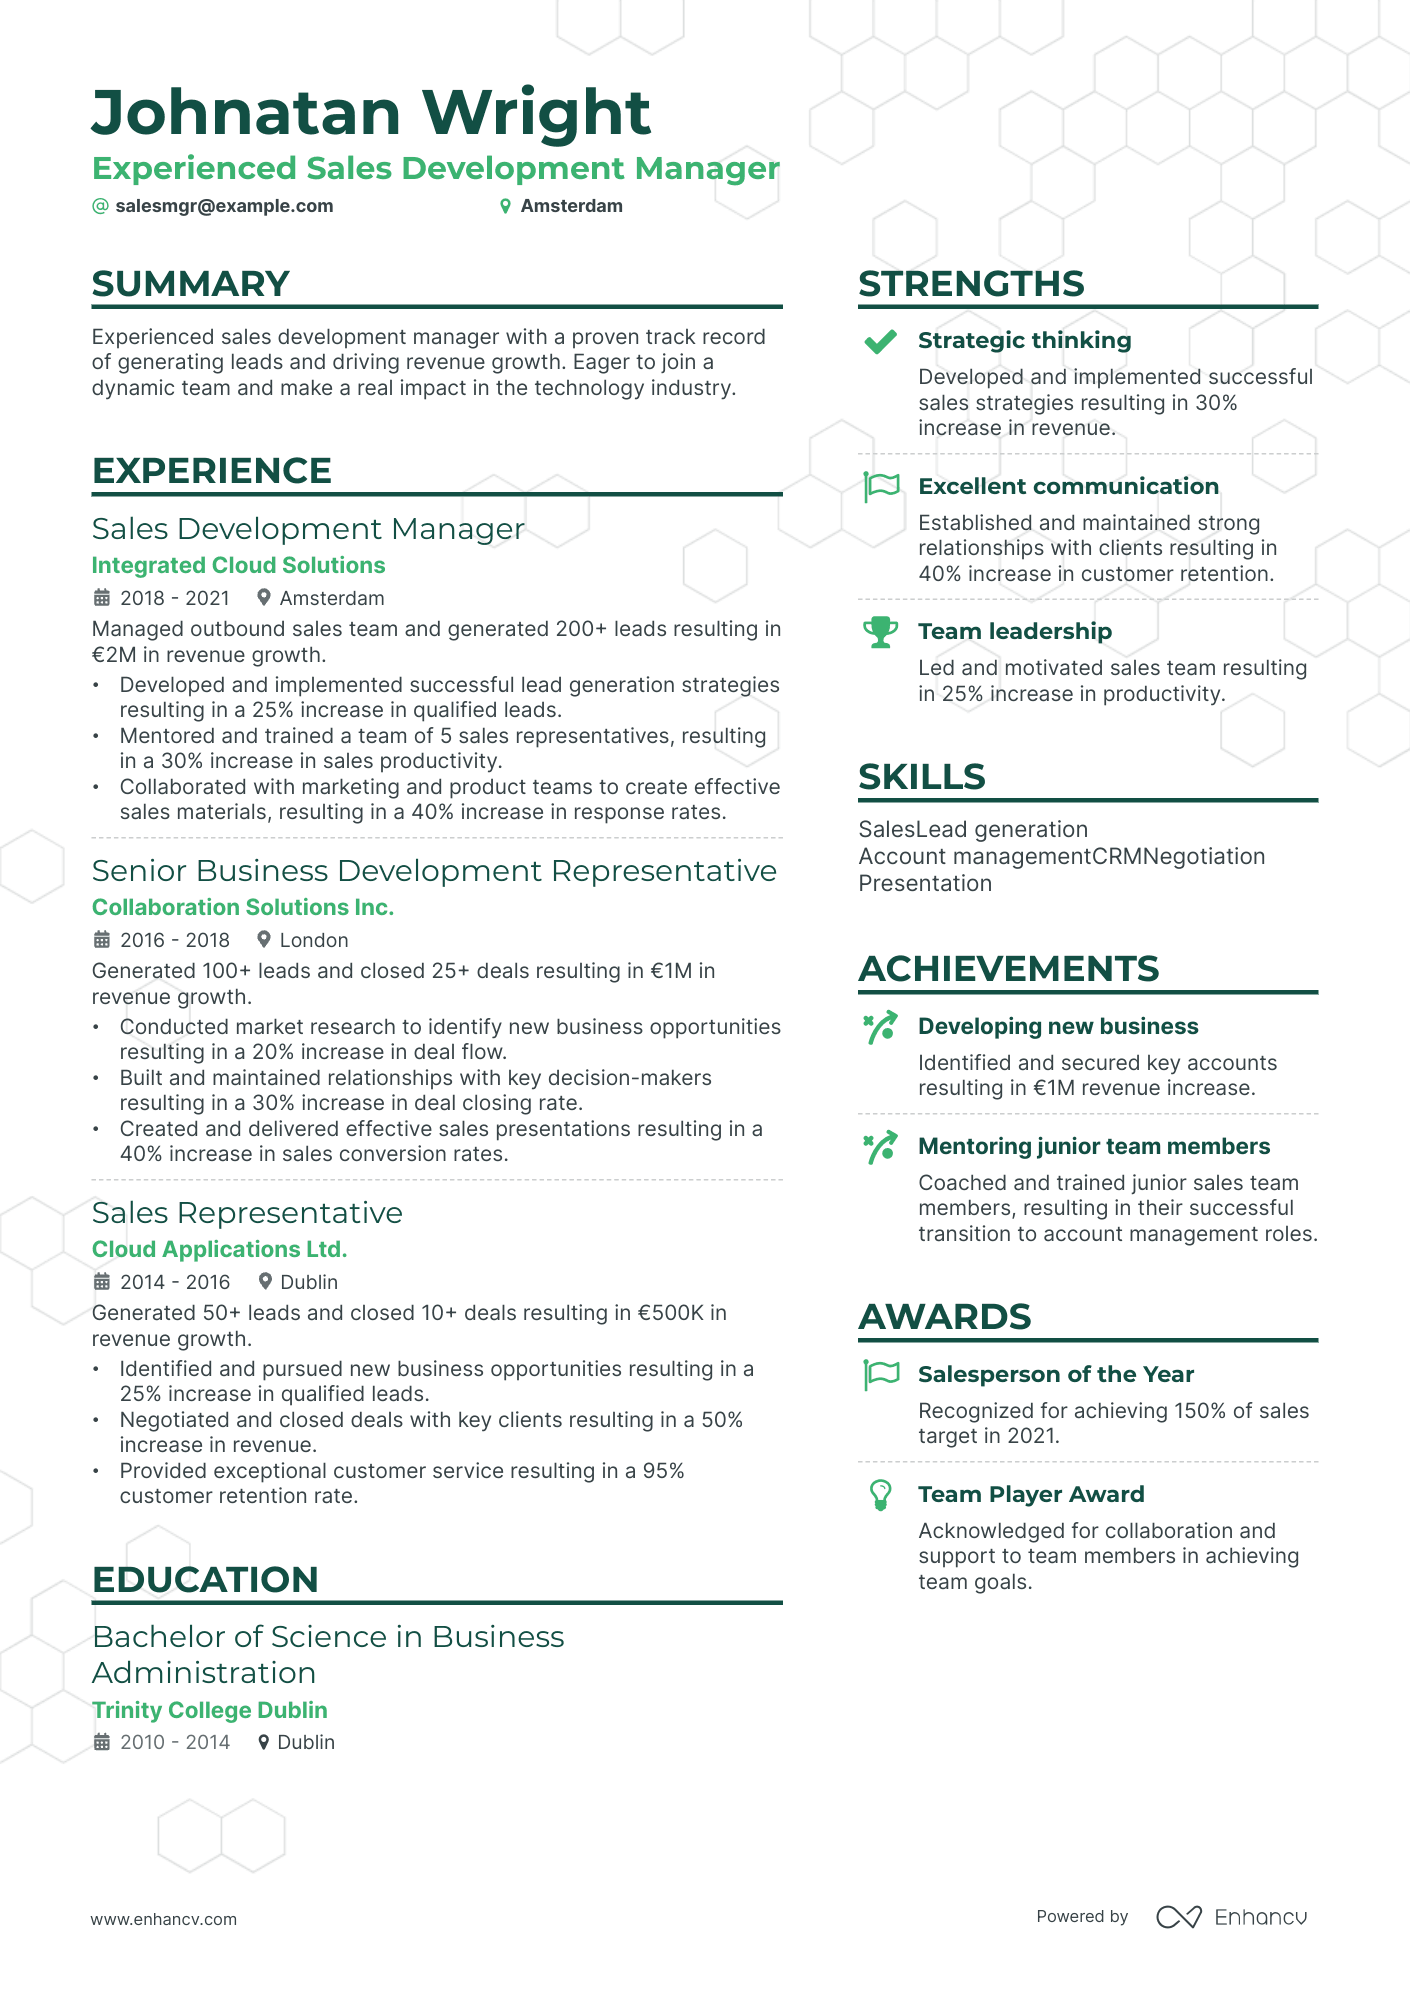 Sales Development Manager resume example